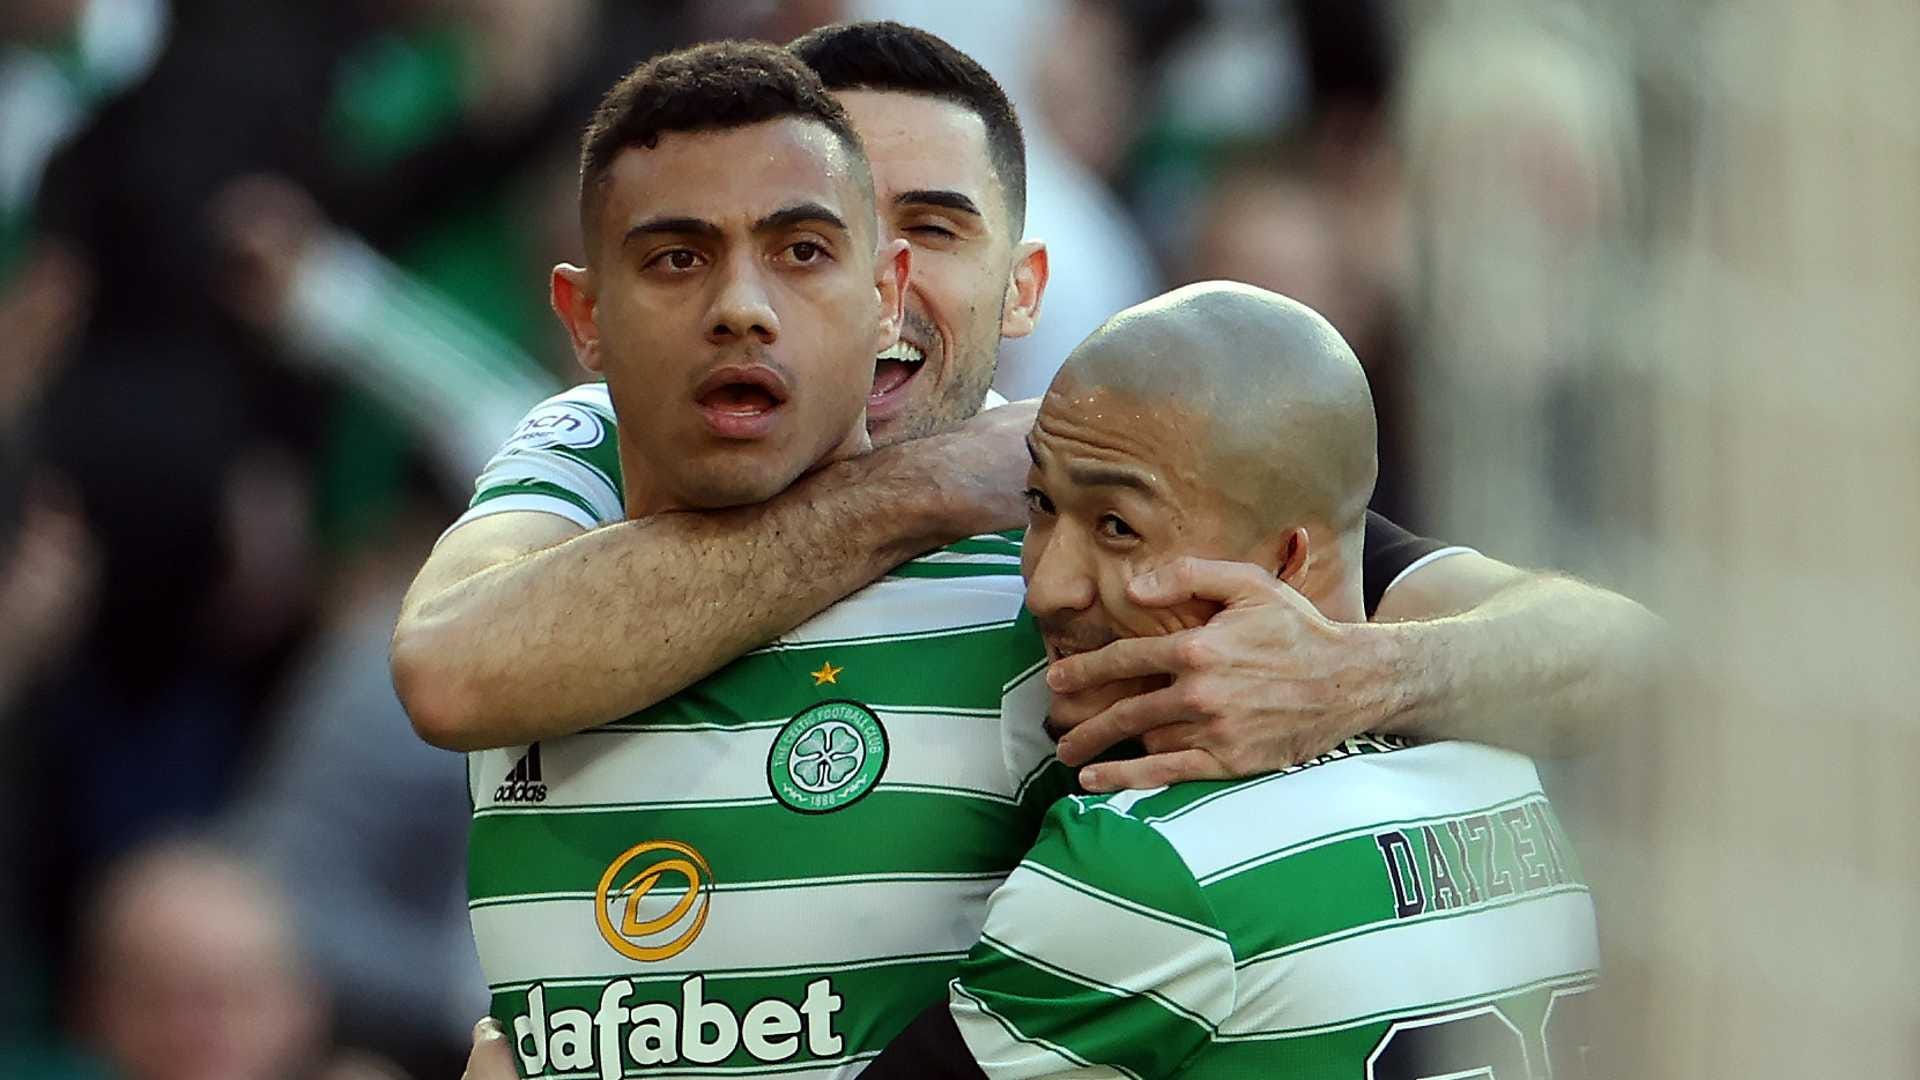 Celtic vs Dundee Utd Live stream, TV channel, kick-off time and where to watch Goal US